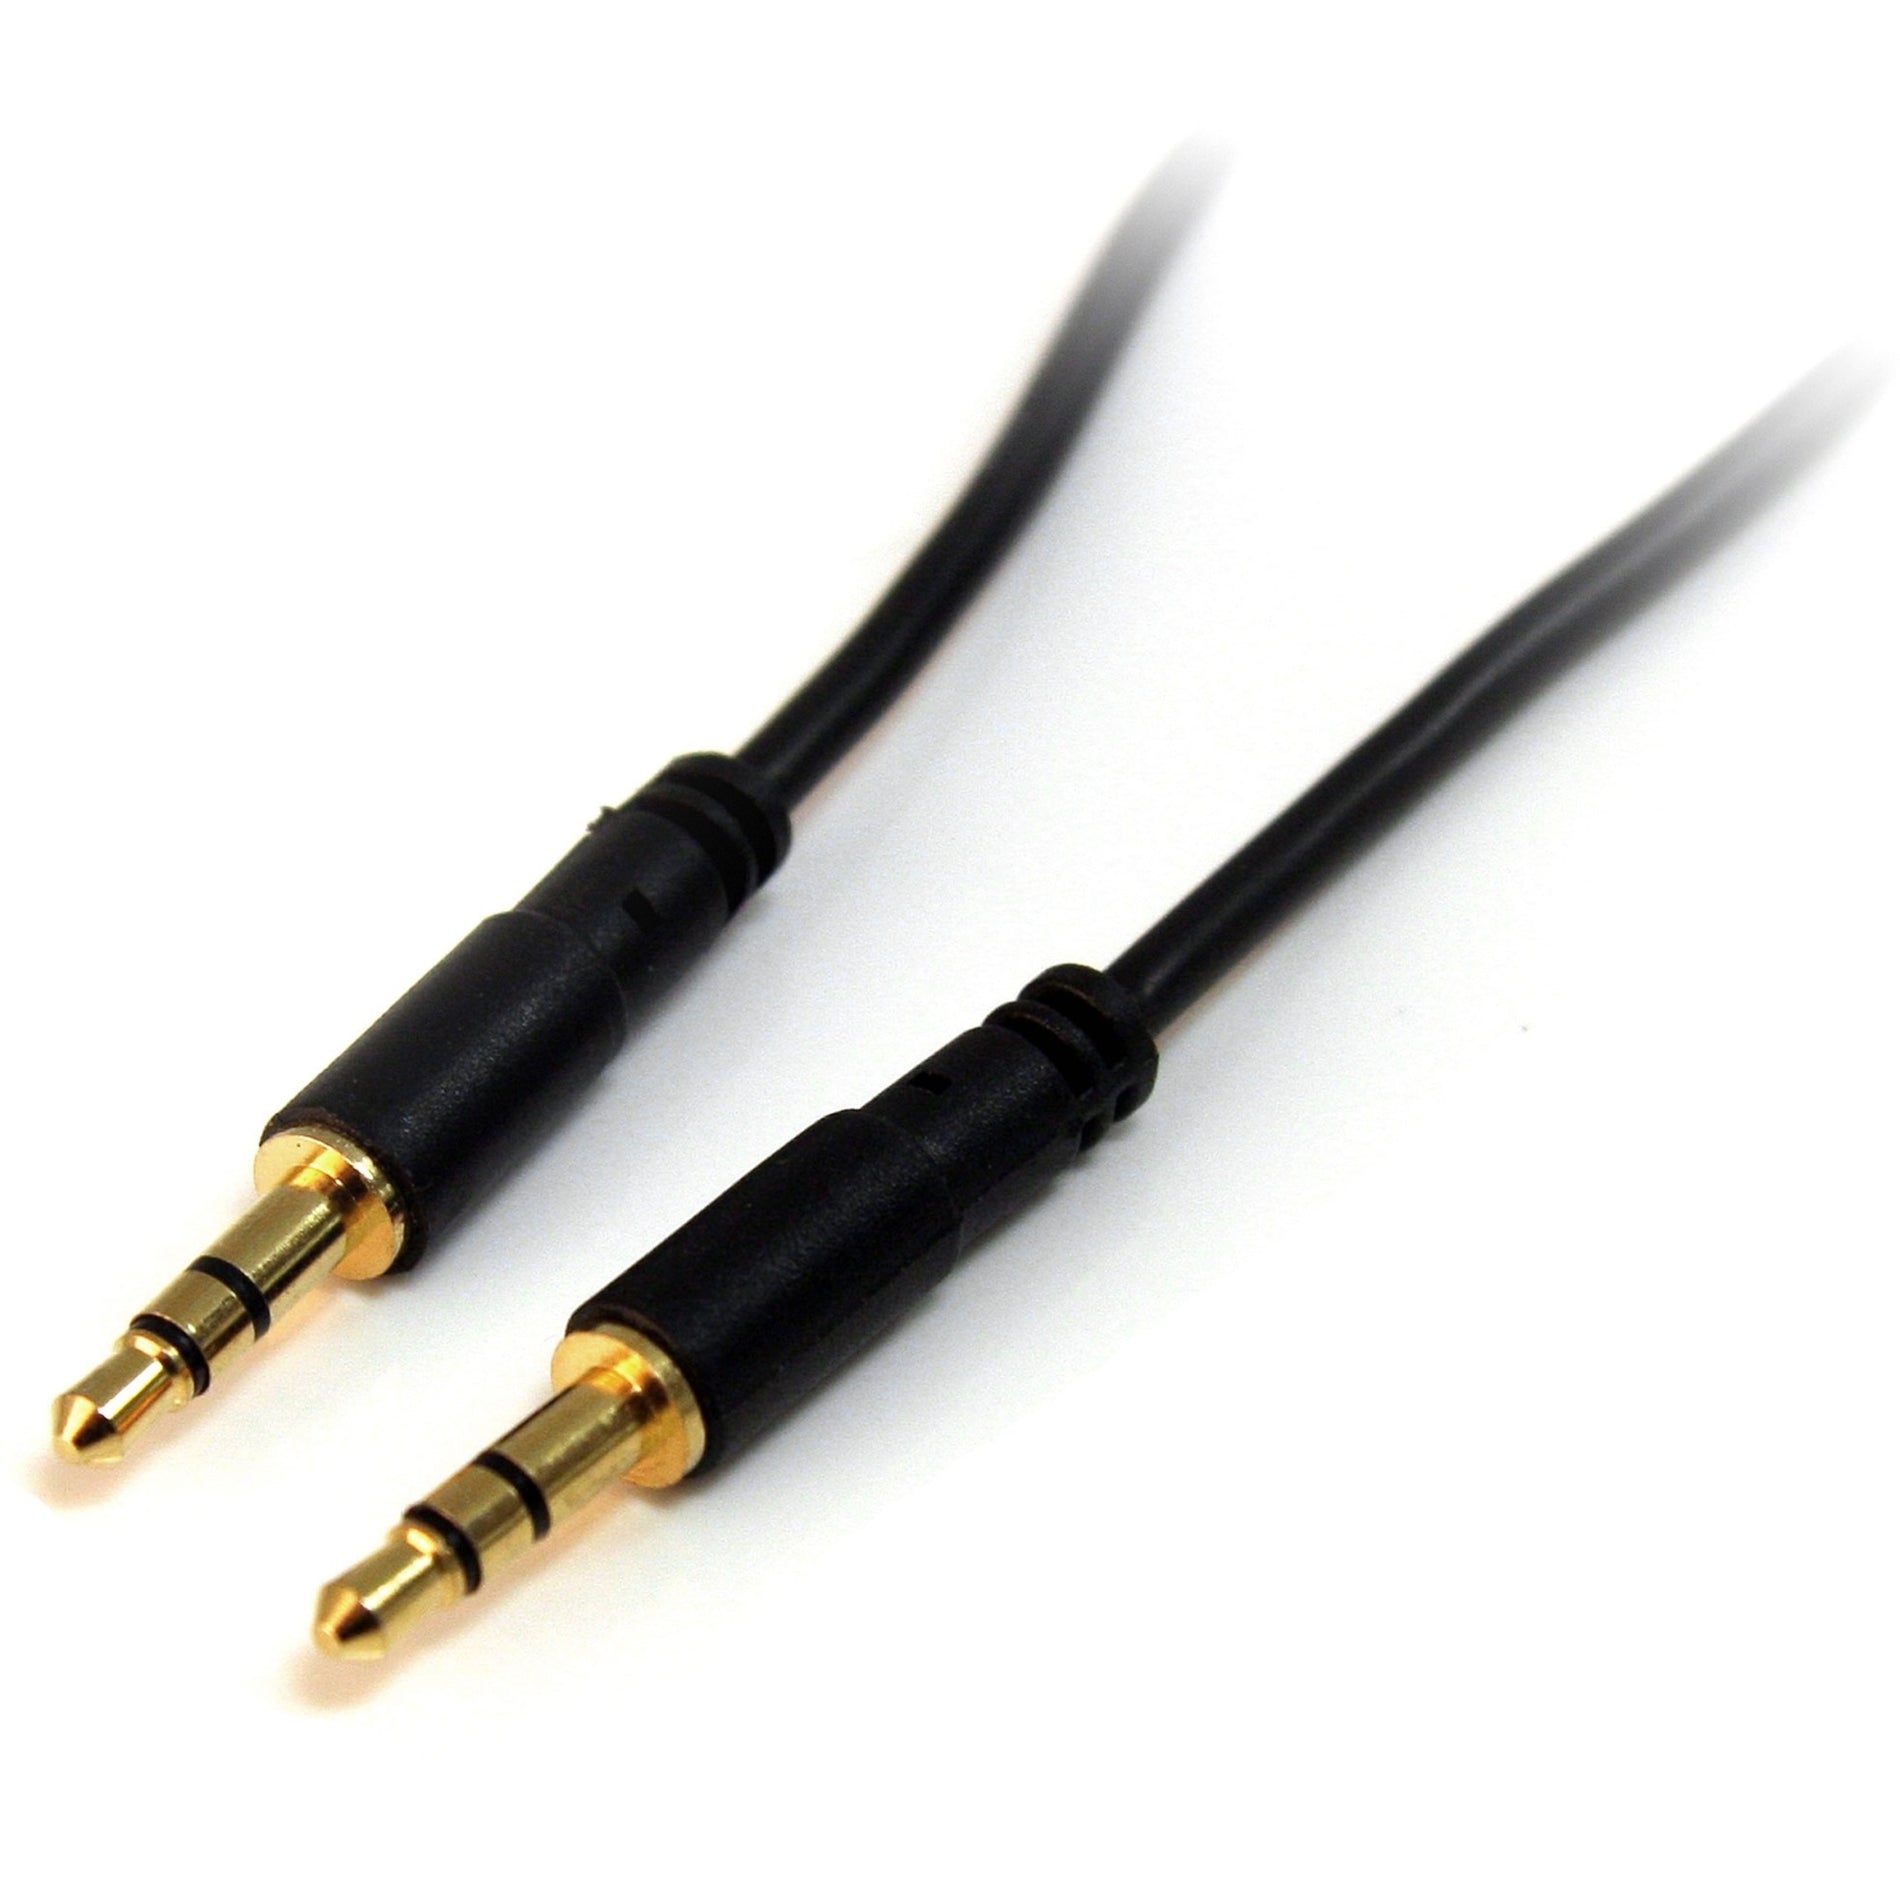 StarTech.com MU15MMS 15 ft Slim 3.5mm Stereo Audio Cable - M/M, Gold Plated Connectors, Strain Relief, Black